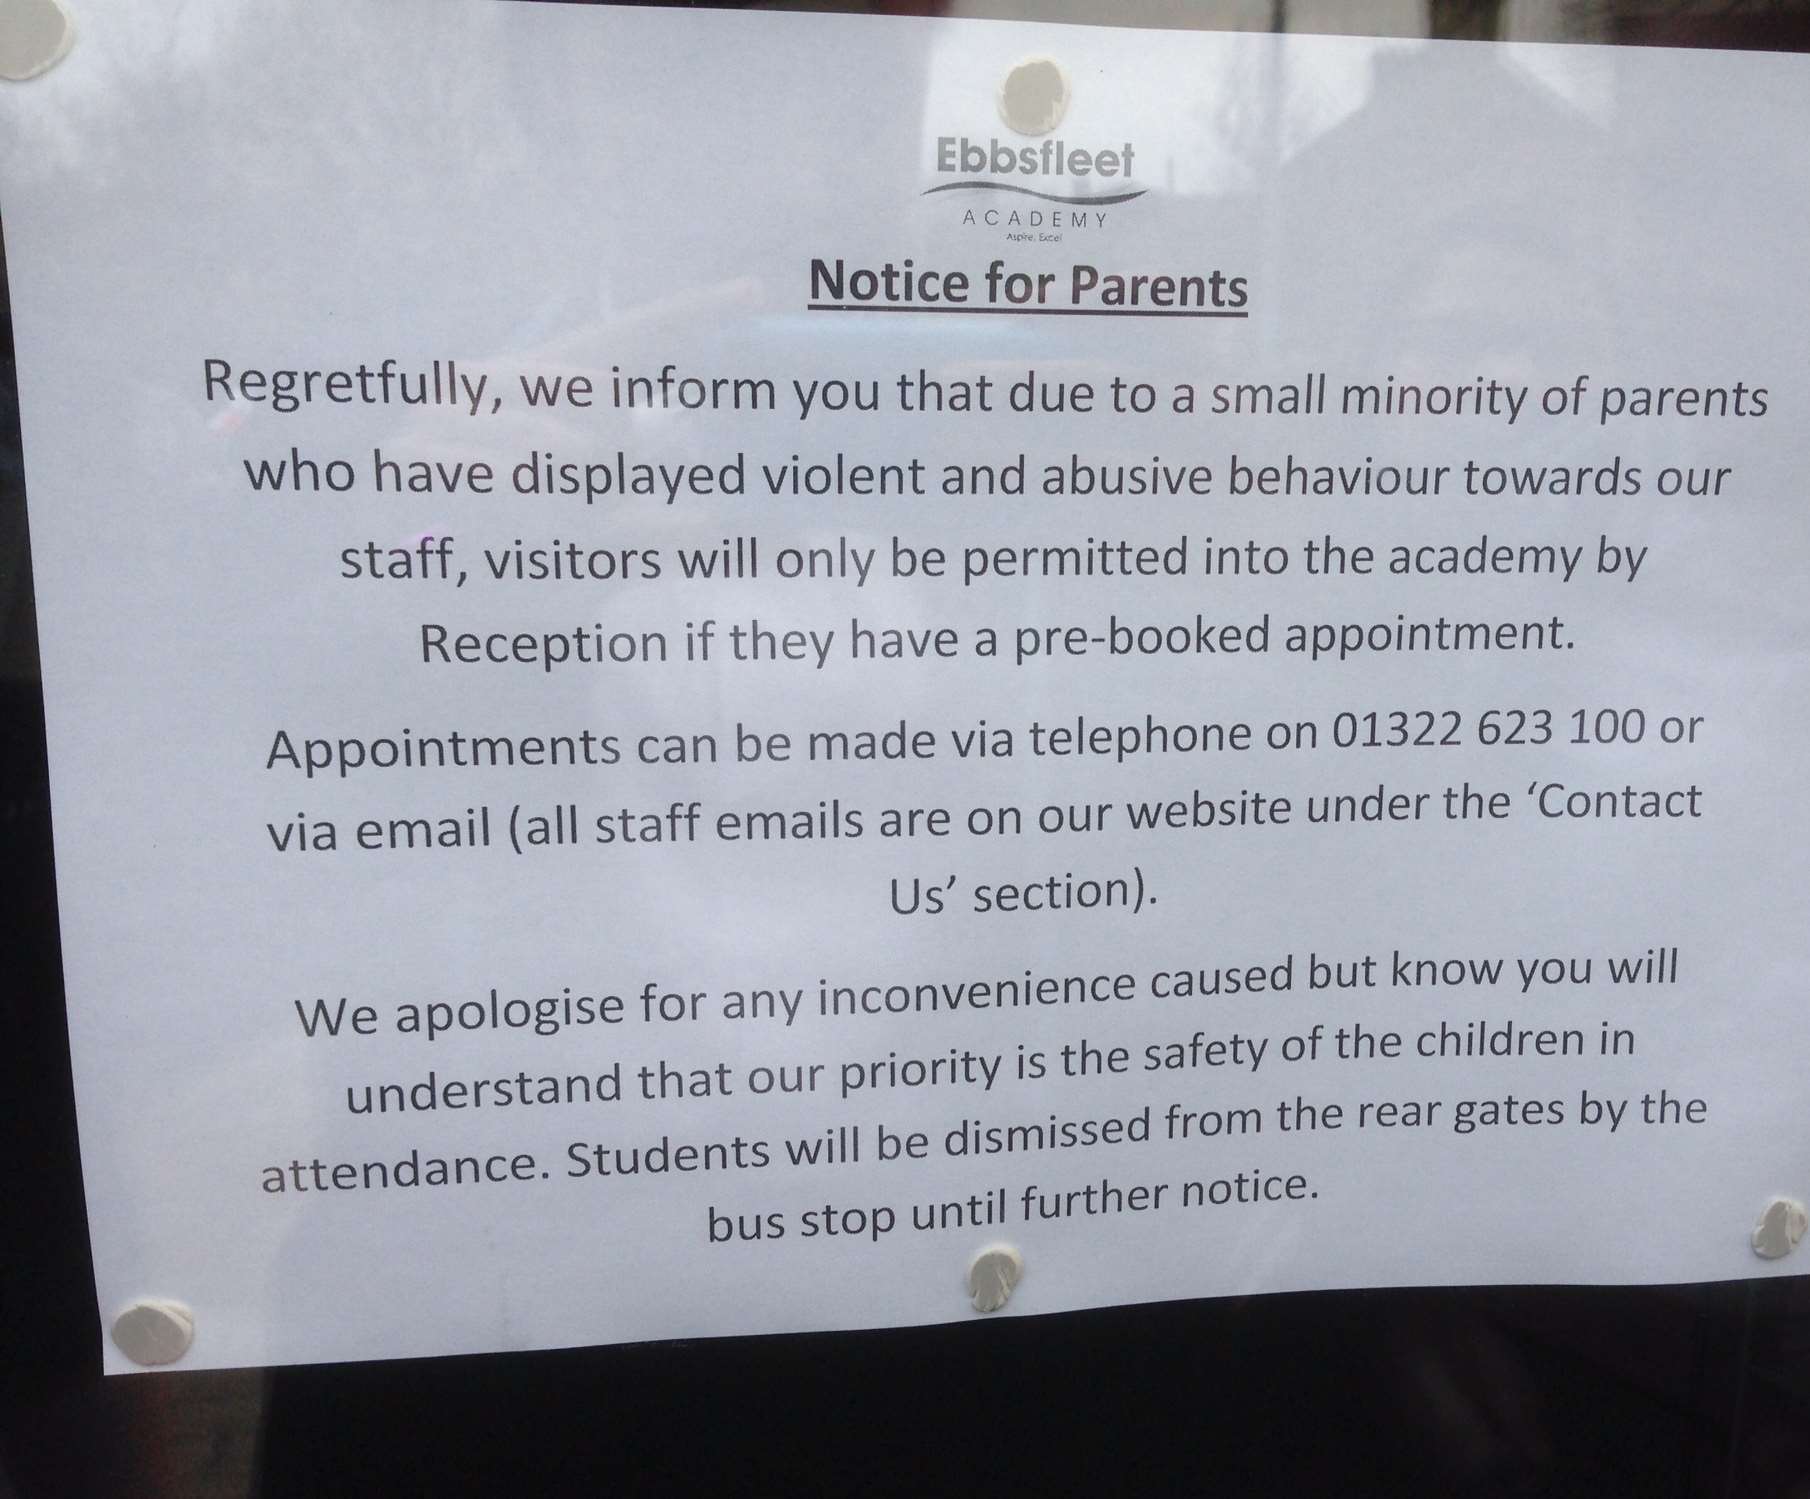 The notice at the school